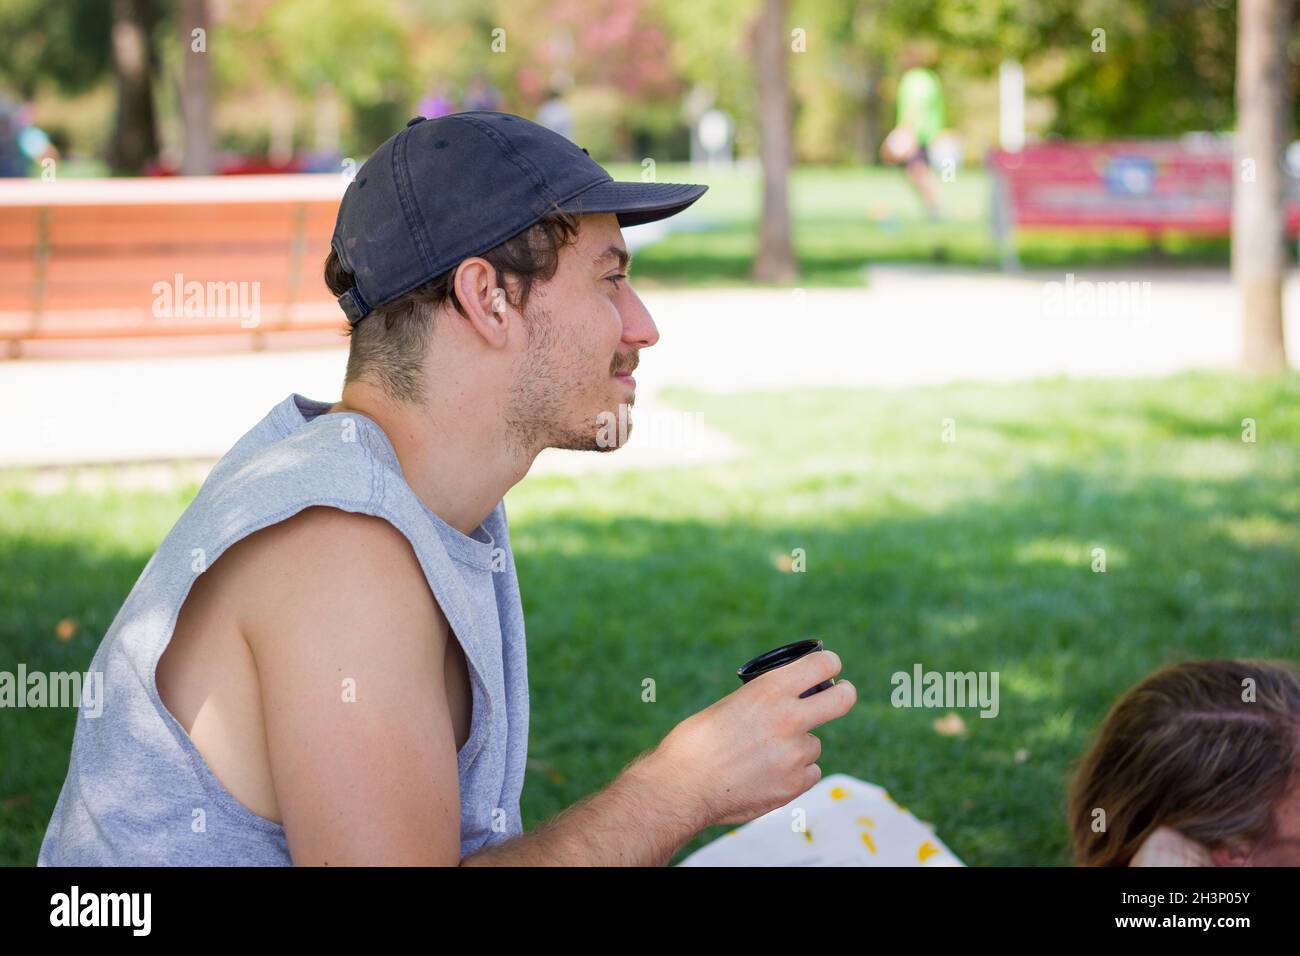 Smiling young man with cap holding drink in park. Leisure time outdoors concept Stock Photo